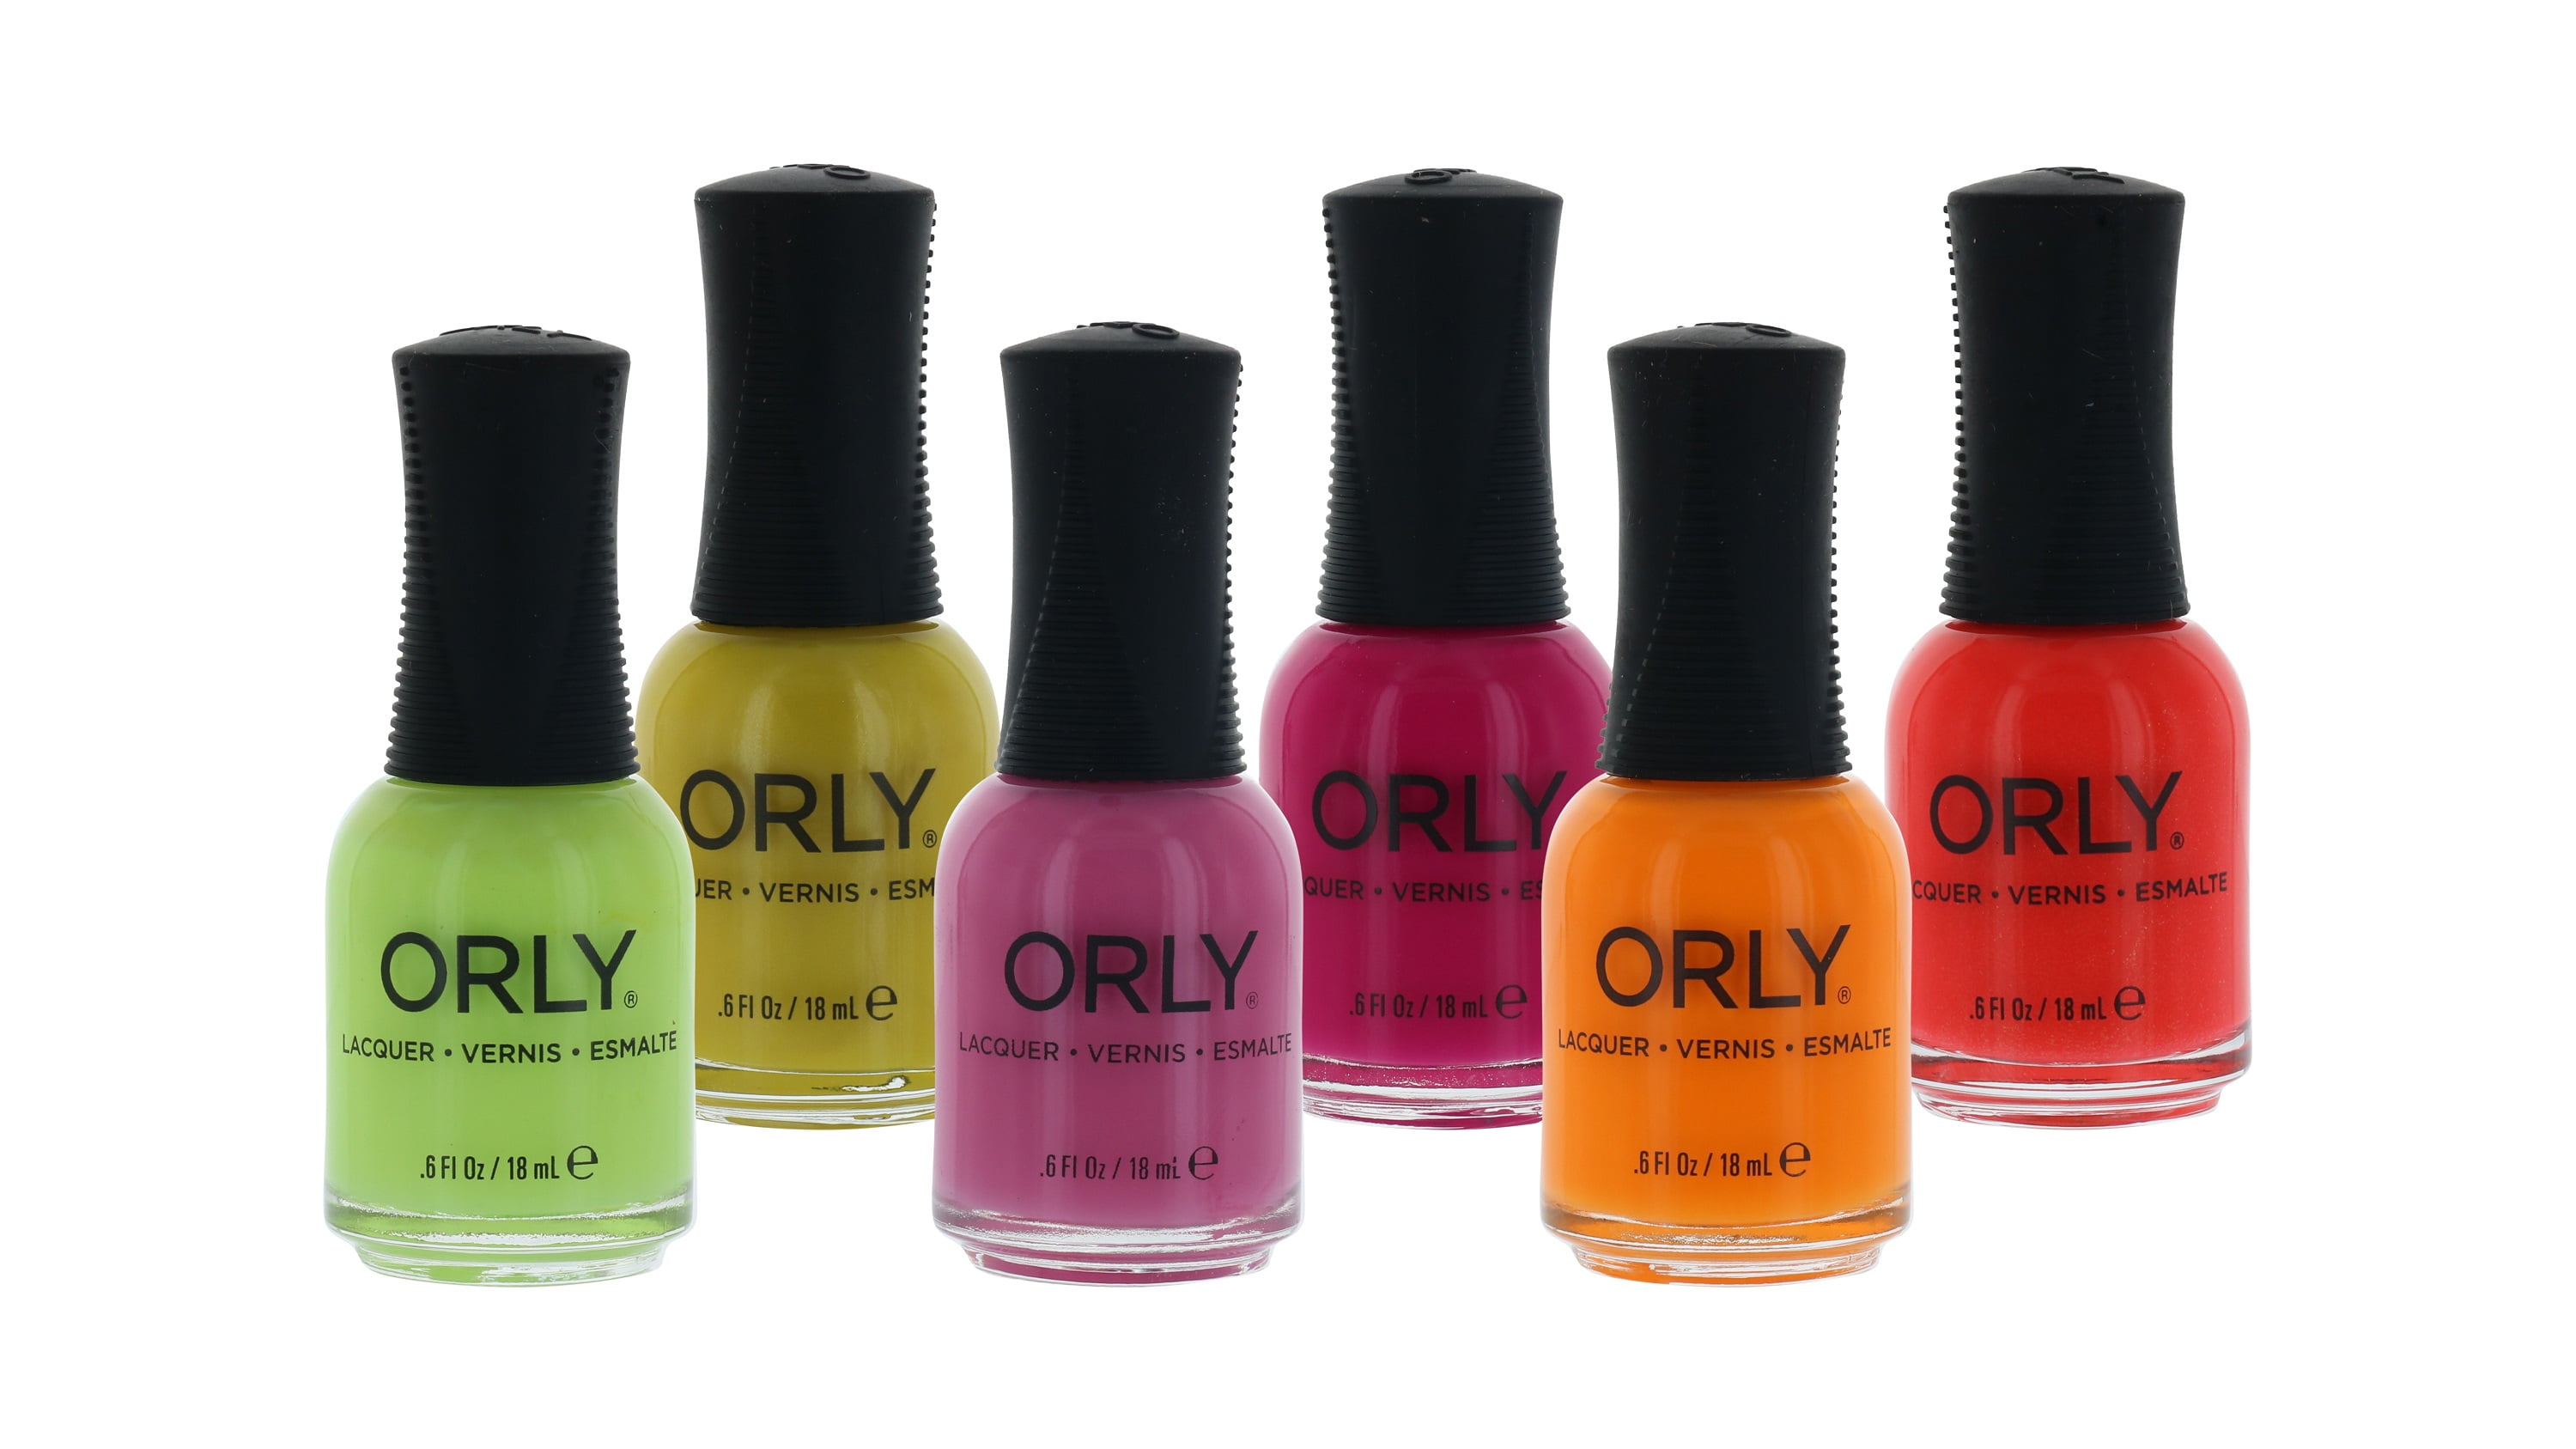 9. Orly Nail Lacquer in "Cotton Candy" - wide 11